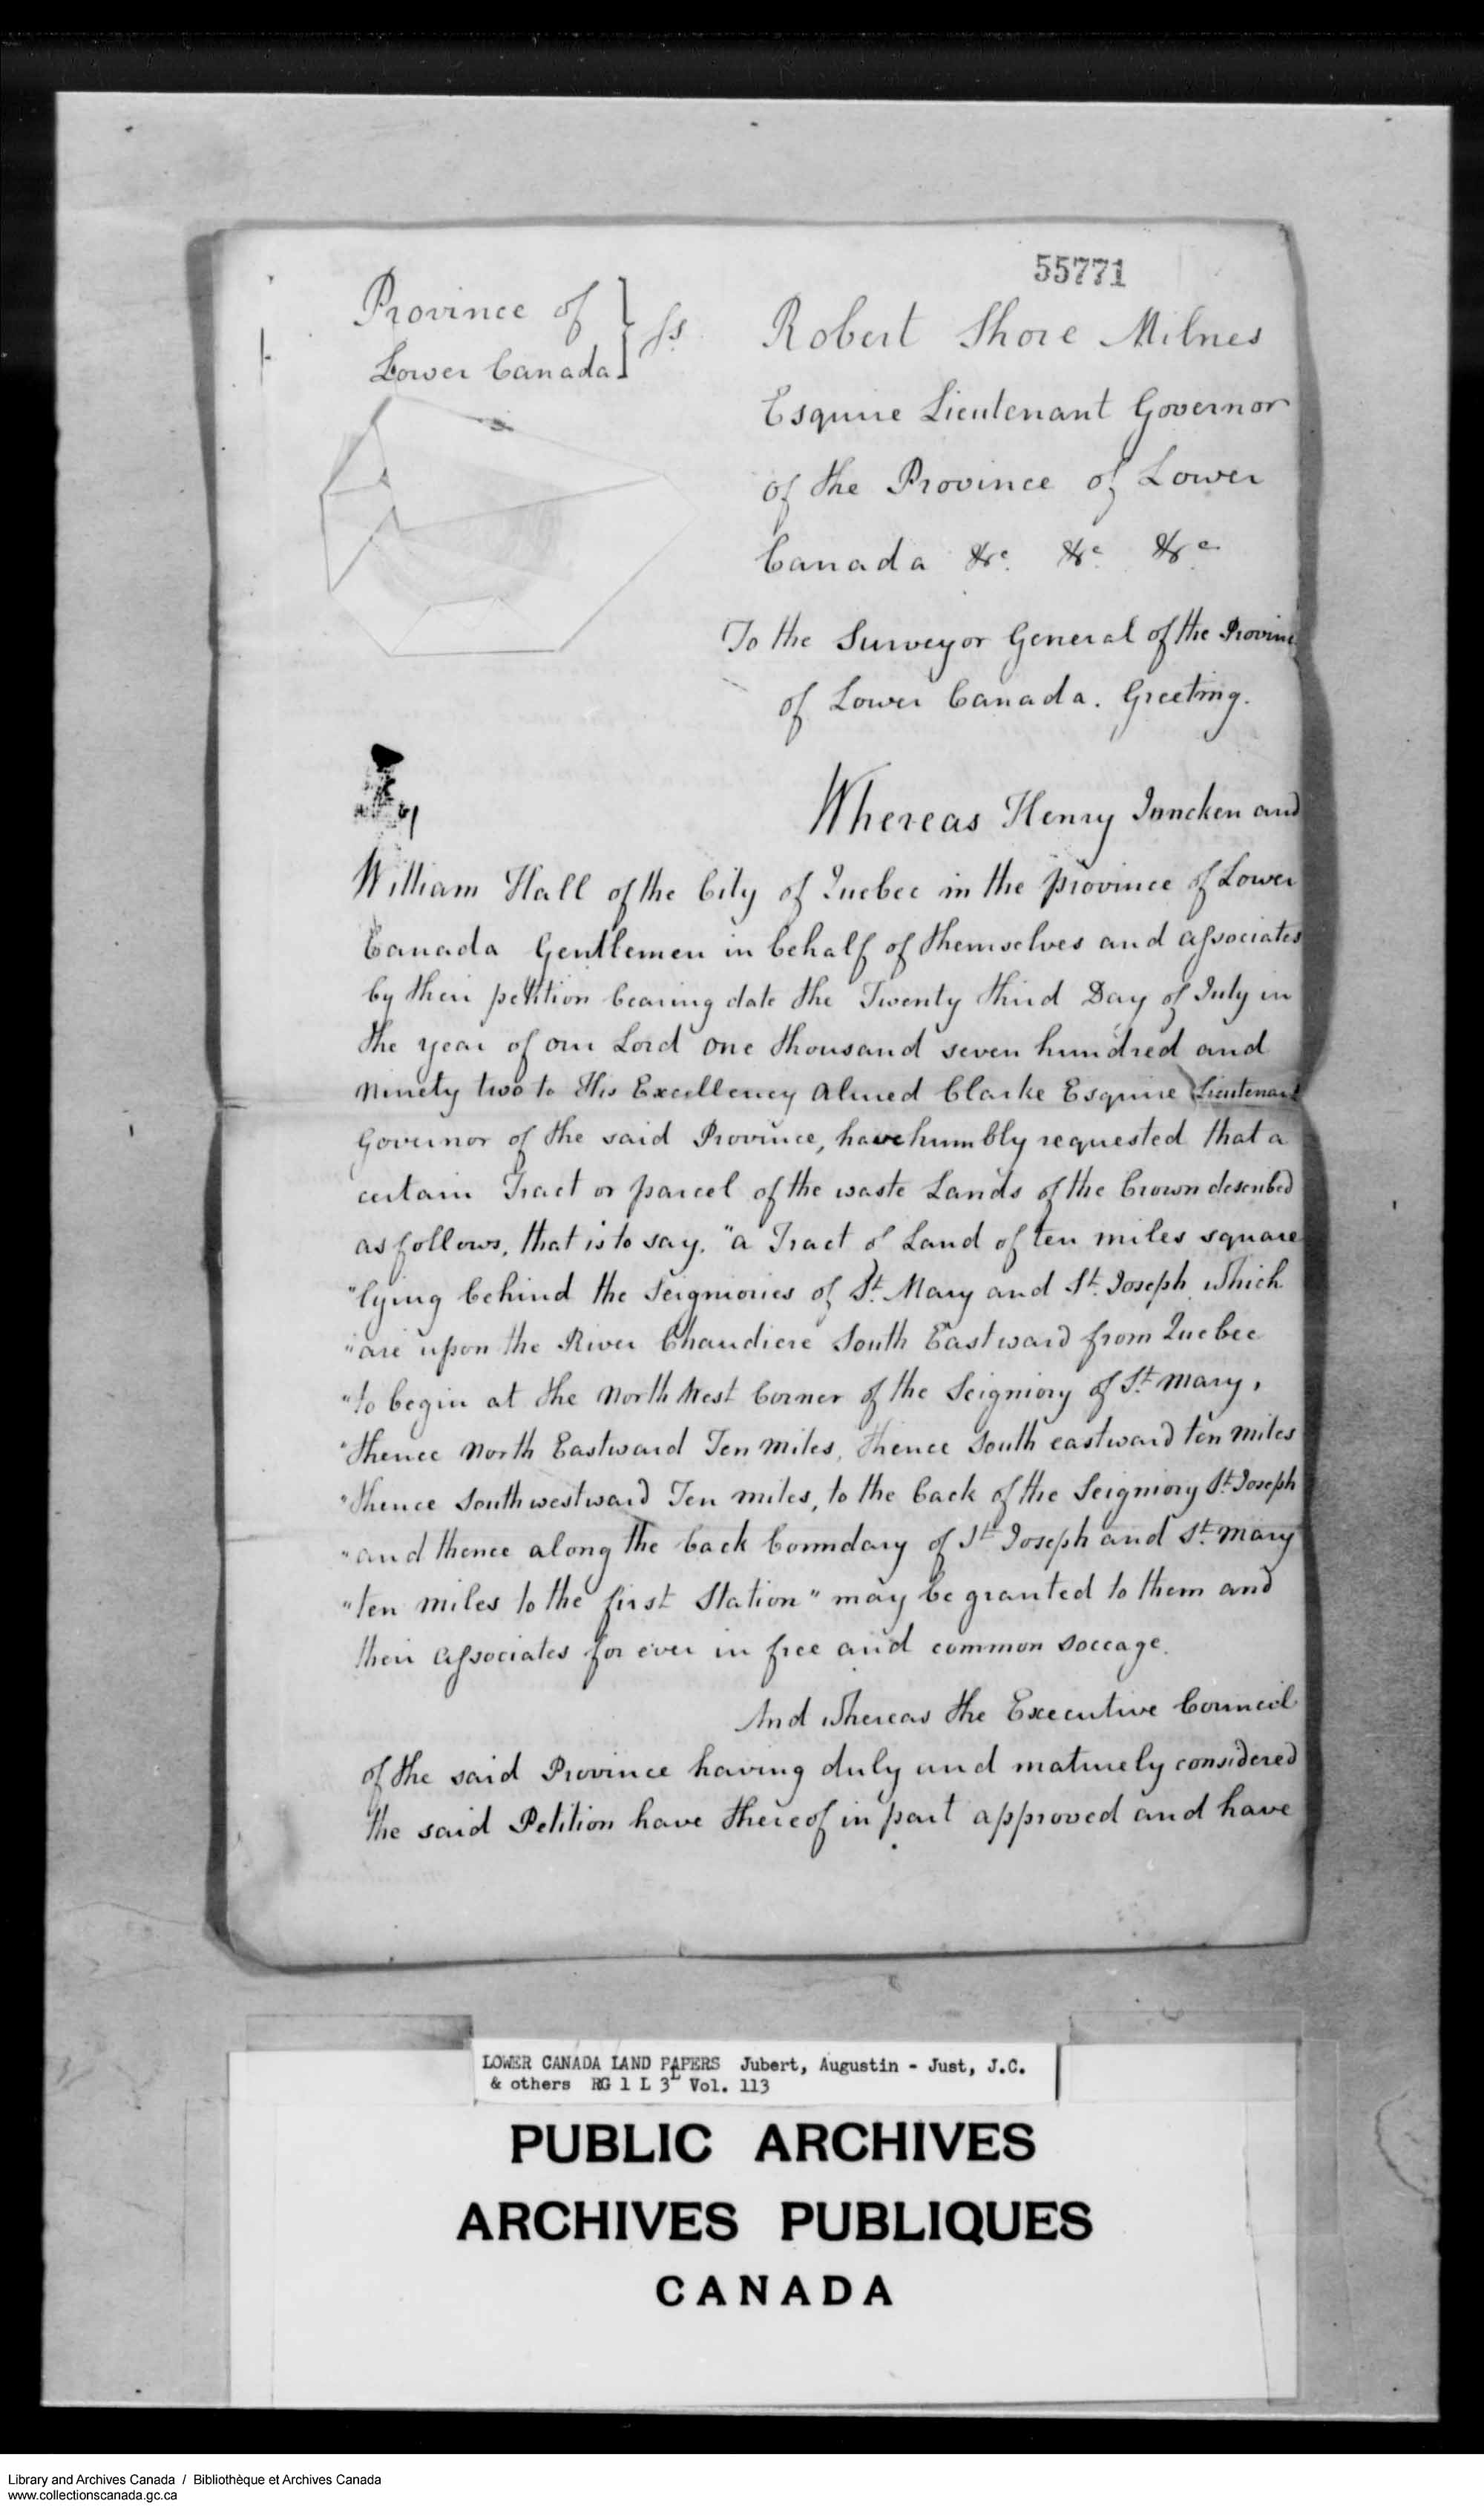 Digitized page of  for Image No.: e008700259